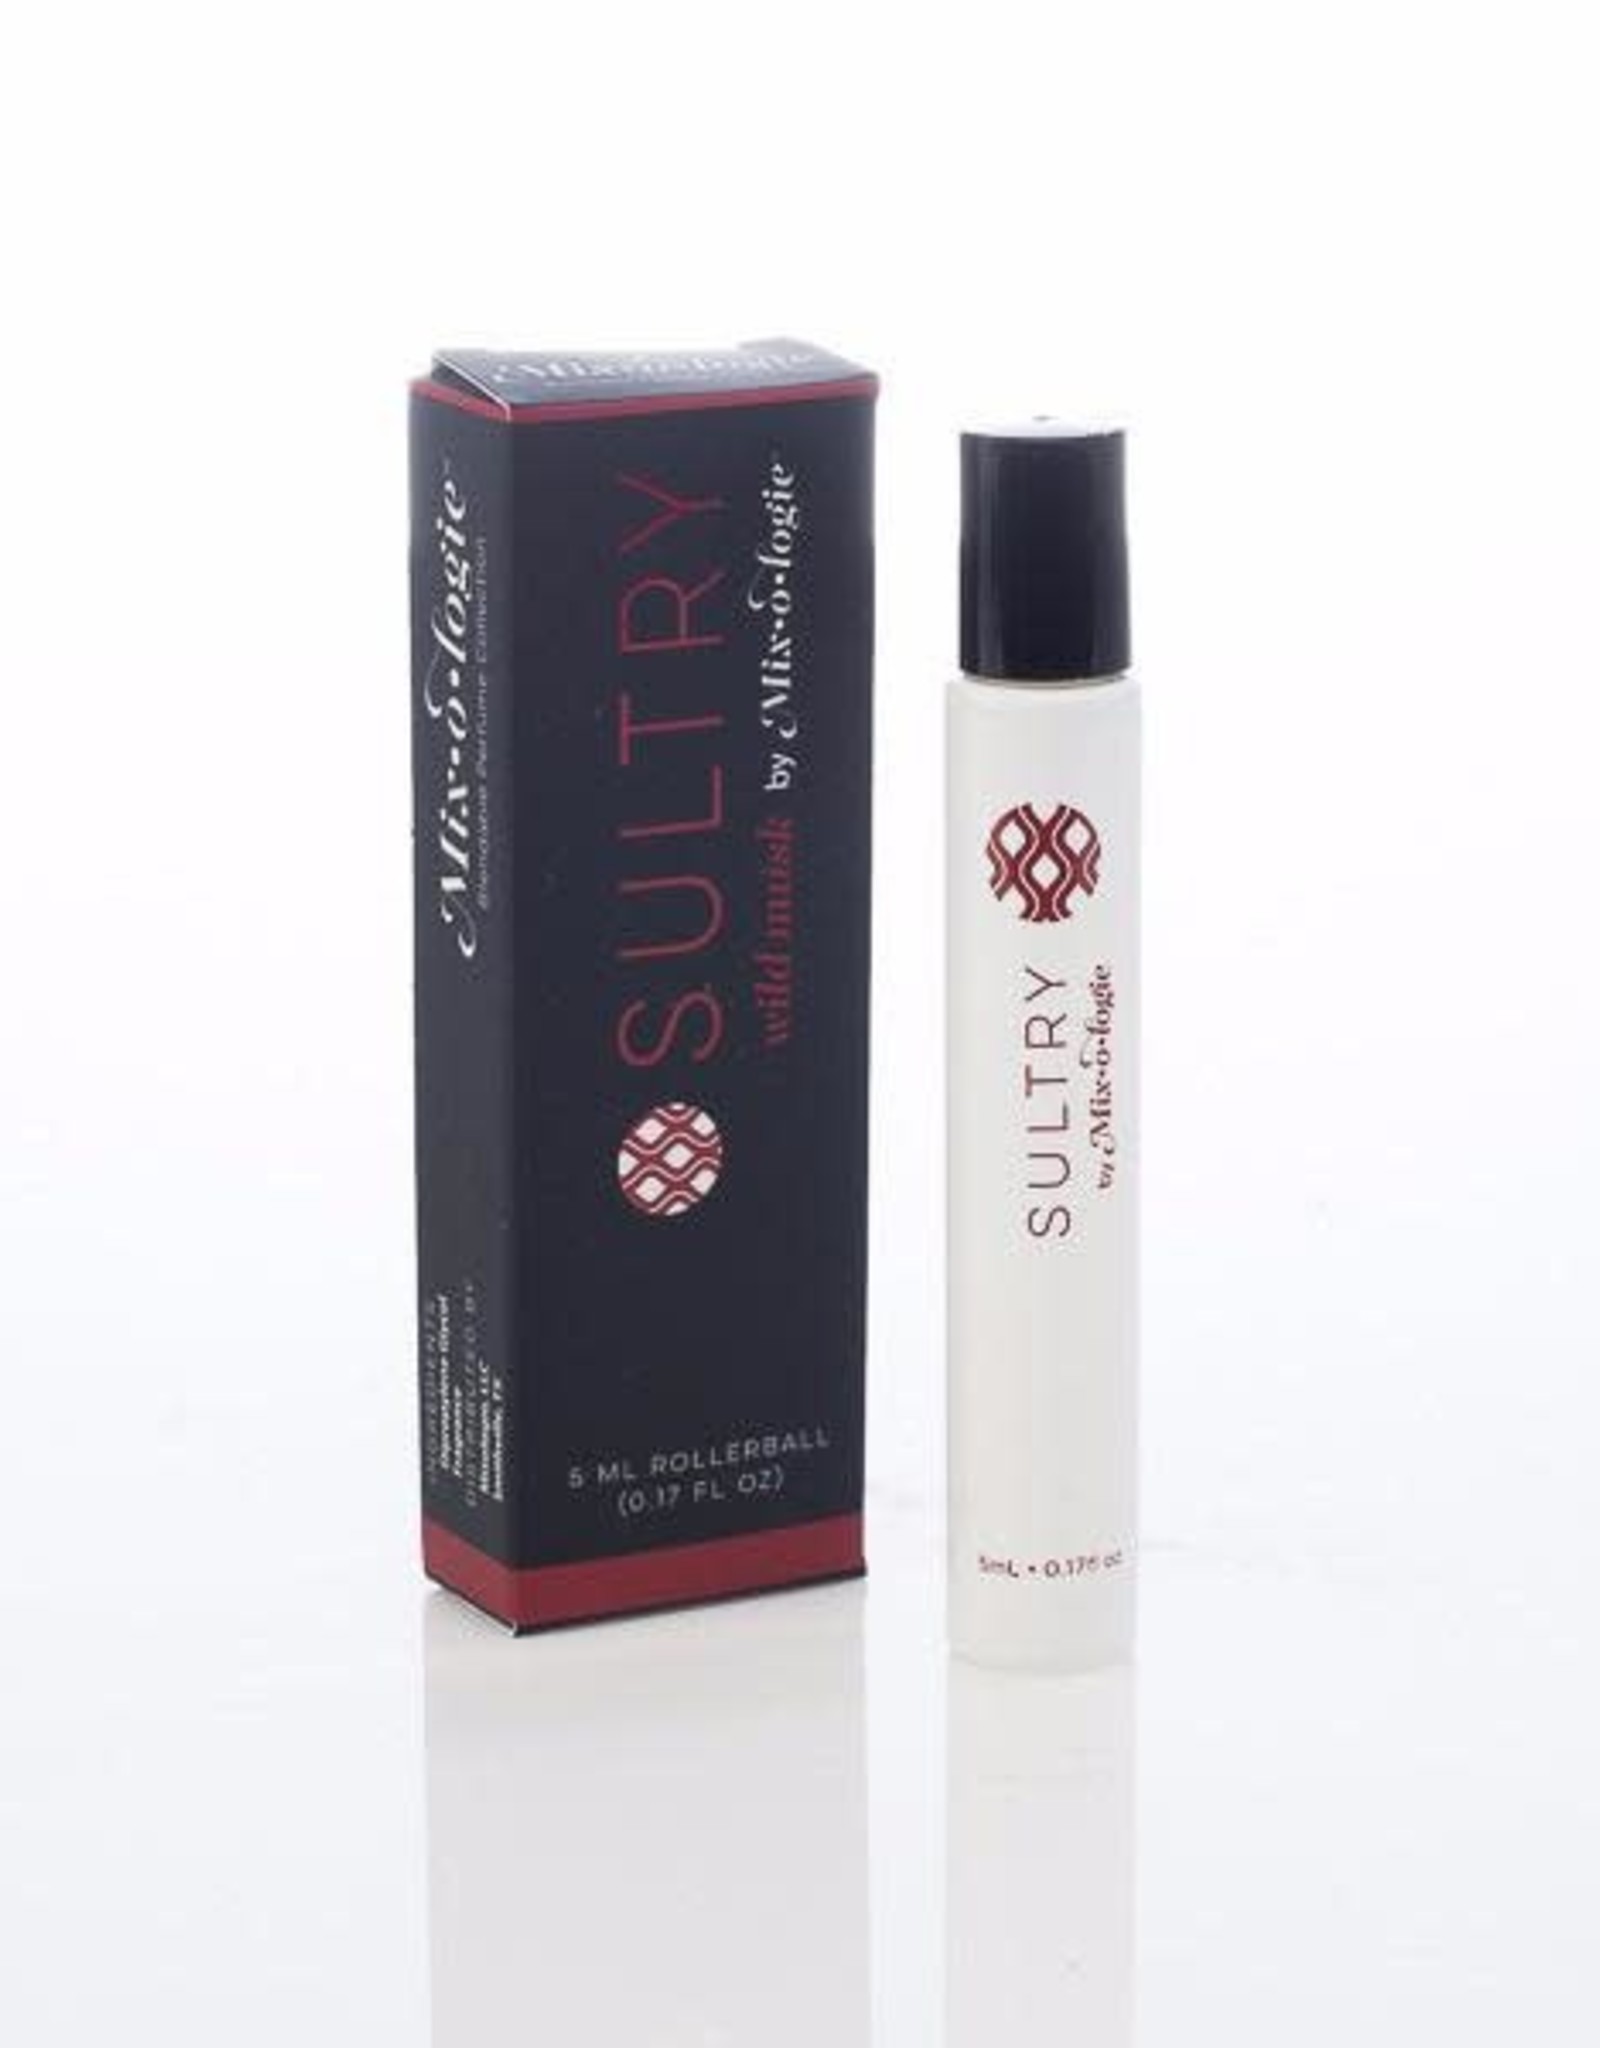 Mixologie Sultry Wild Musk Rollerball Perfume